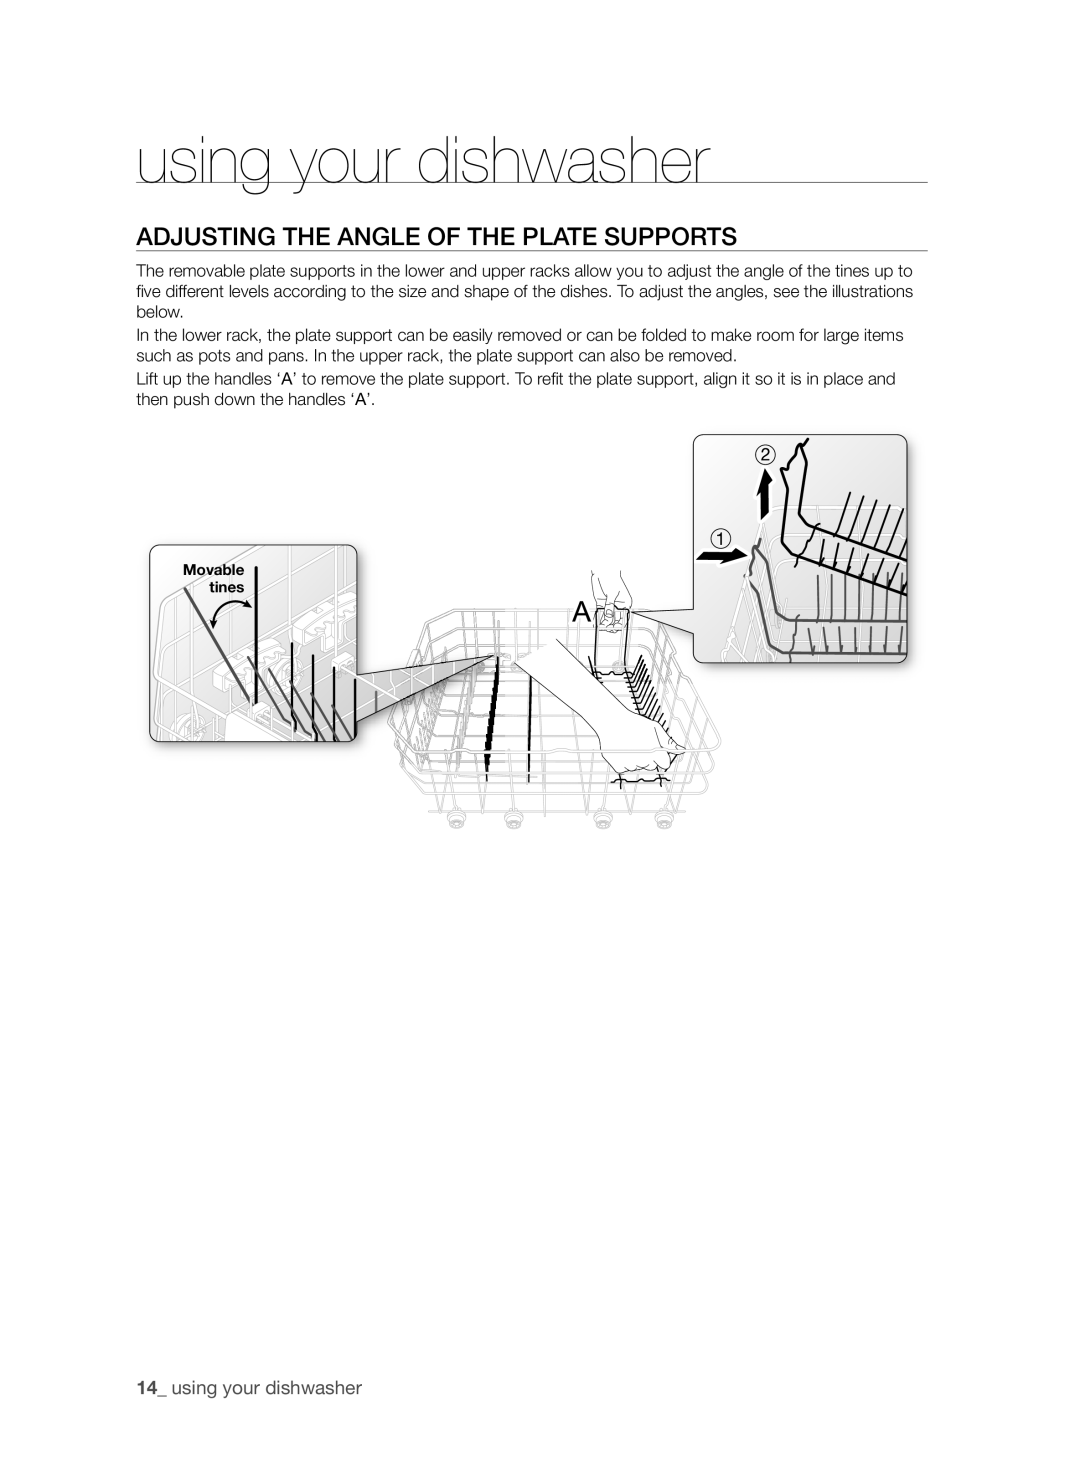 Samsung DMR57LHB, DMR57LHS, DMR57LHW user manual Adjusting the angle of the plate supports, using your dishwasher 